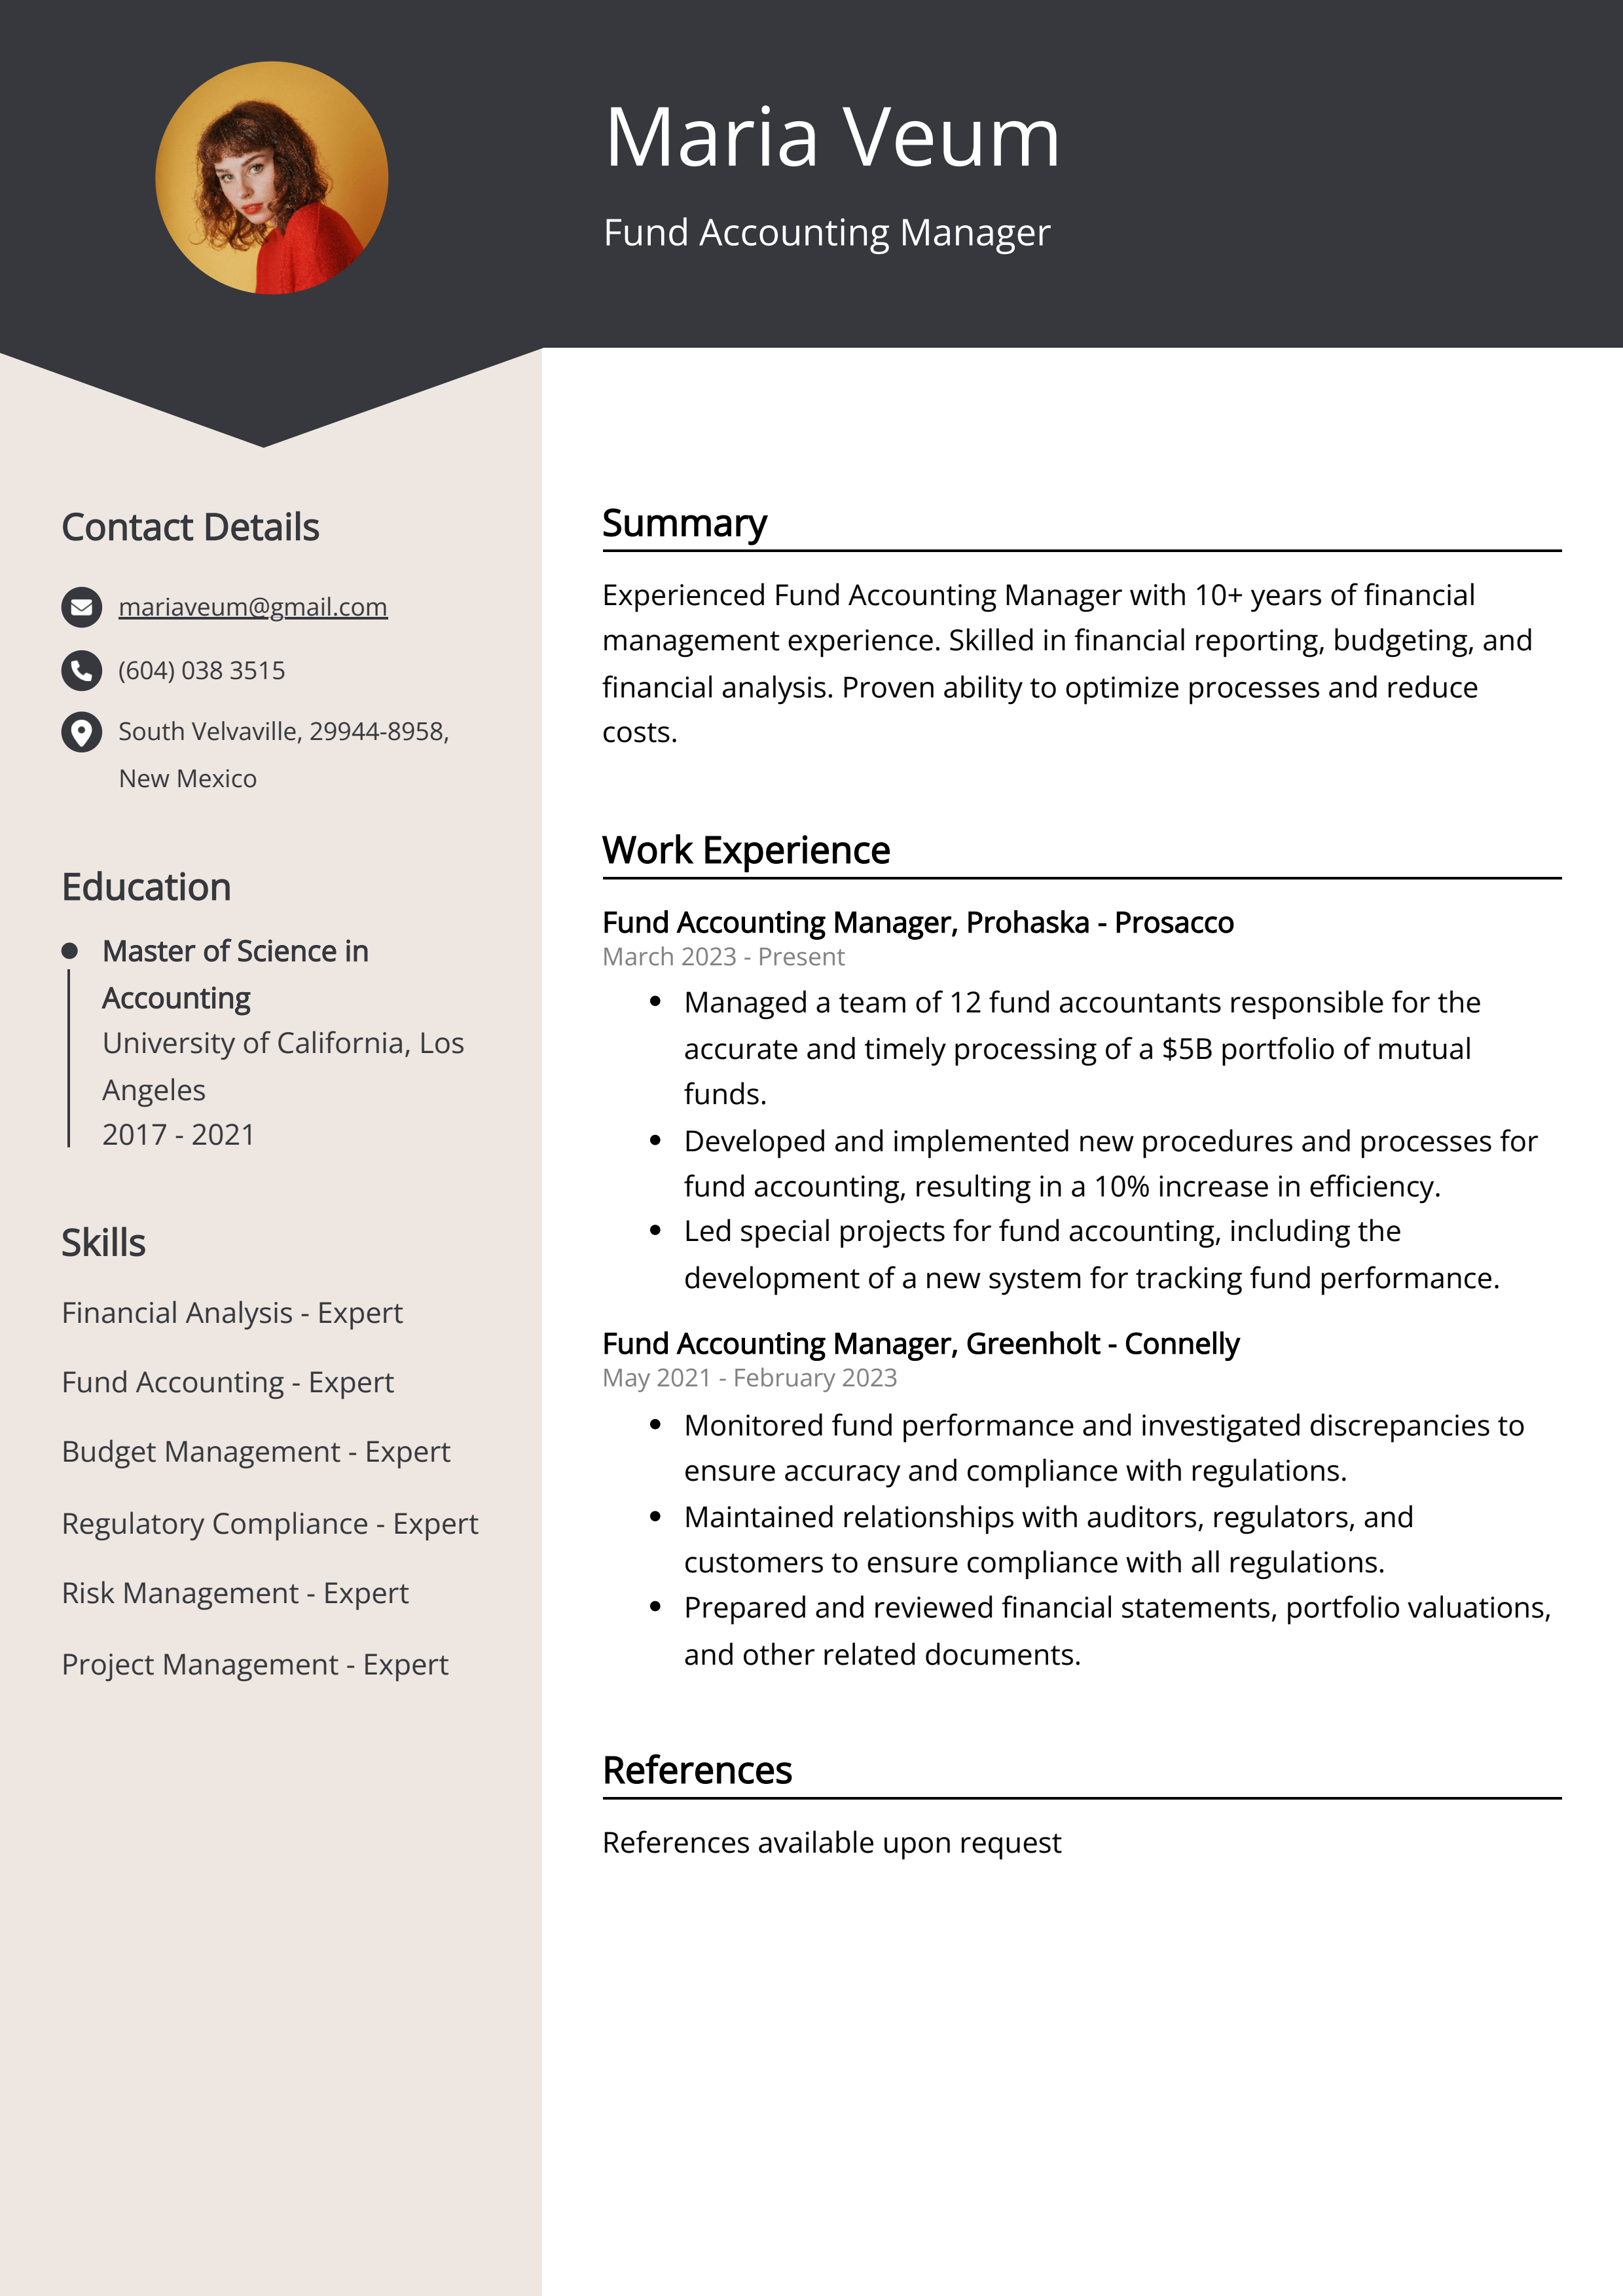 Fund Accounting Manager CV Example